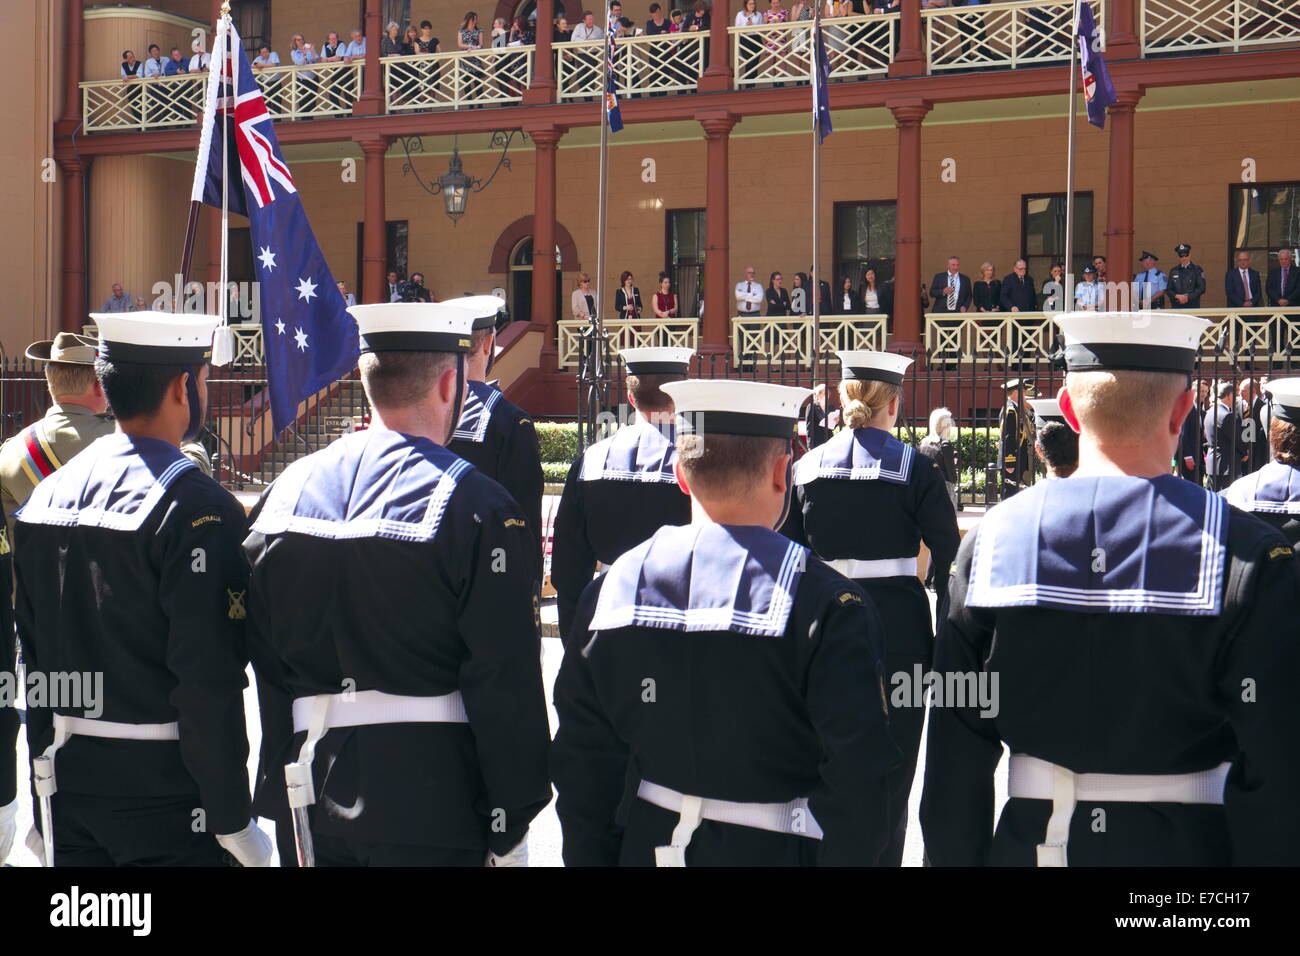 Australian military personnel in macquarie street sydney as part of Governor Marie Bashir opening of the 55th NSW State parliament,Sydney,2014 Stock Photo